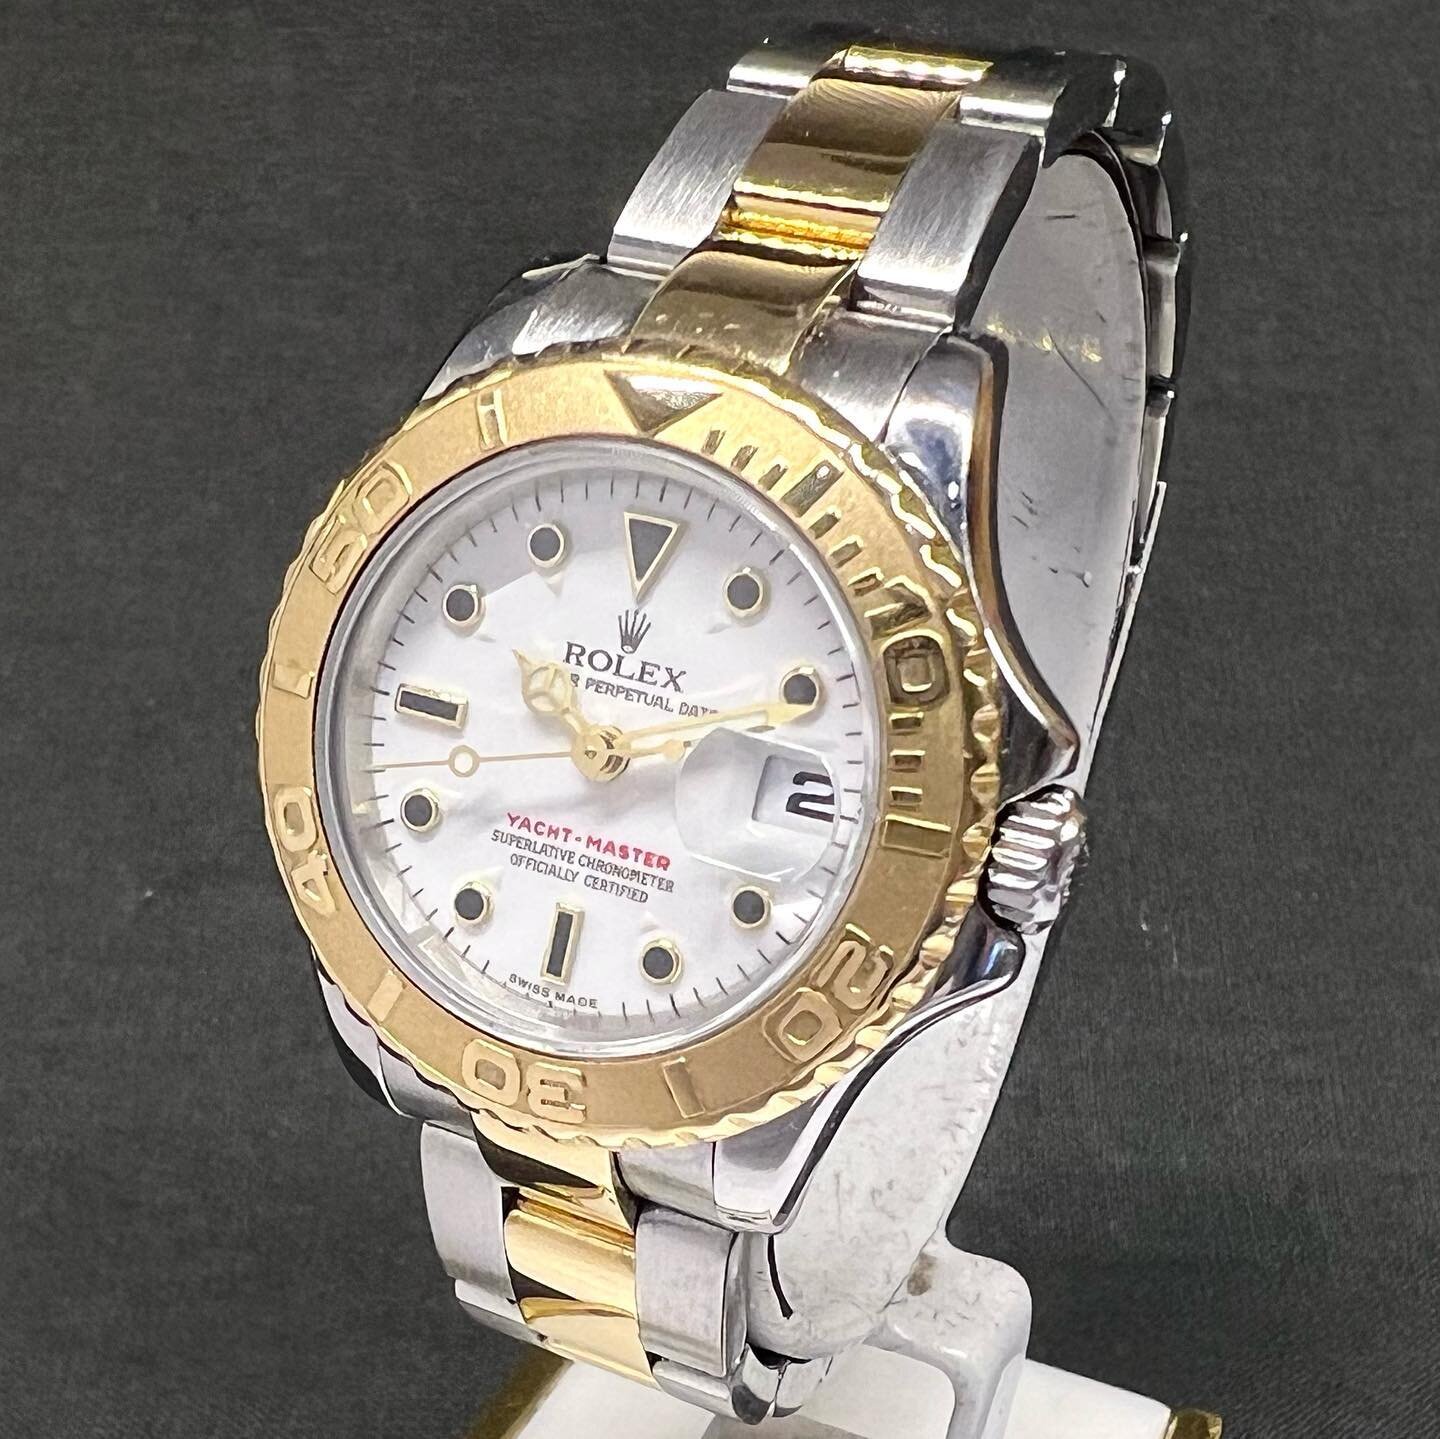 NEW ARRIVAL. Rolex Lady 29 mm Yachtmaster Two Tone. Ref 169623. Year 2001. Serviced. 6 month Warranty. Price 59000:- (5500&euro;)